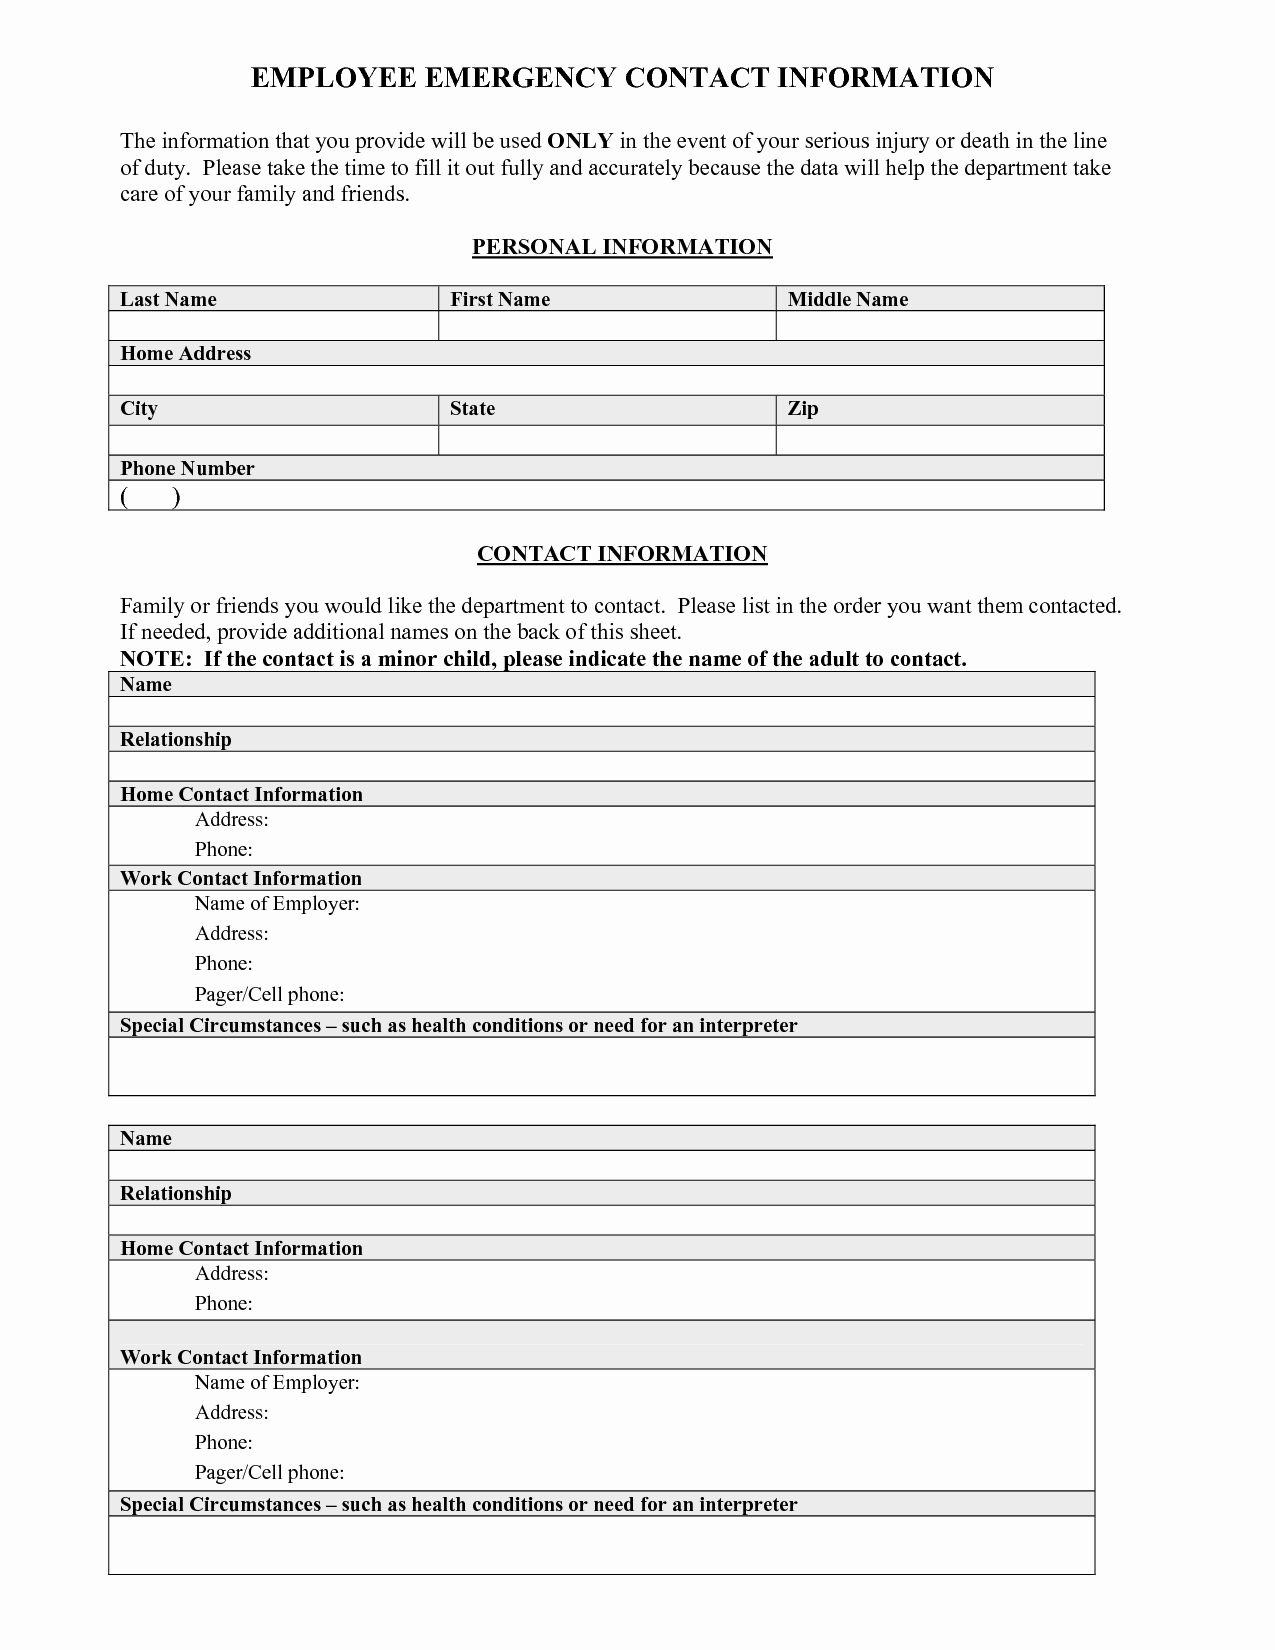 Employee Emergency Contact form Word Lovely Employee Emergency Contact Information Sheet to